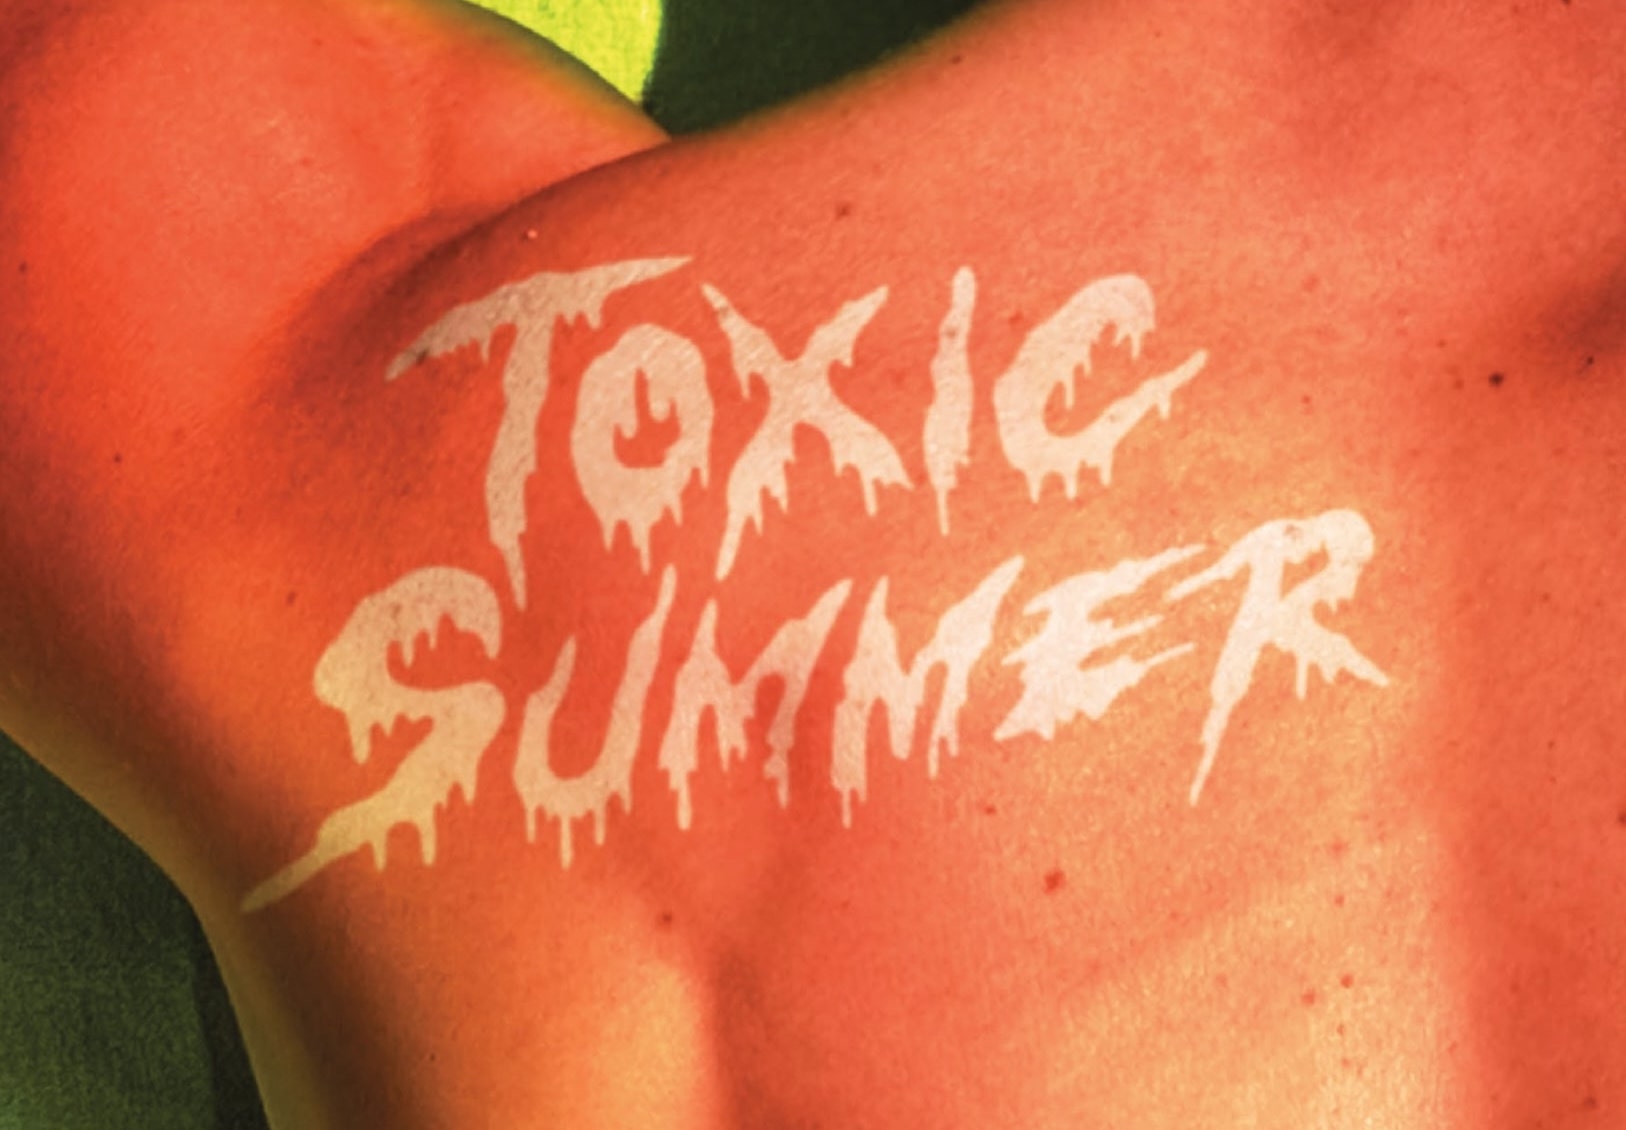 You'll get a sunburn from new 'Toxic Summer' #1 second printing cover - Exclusive